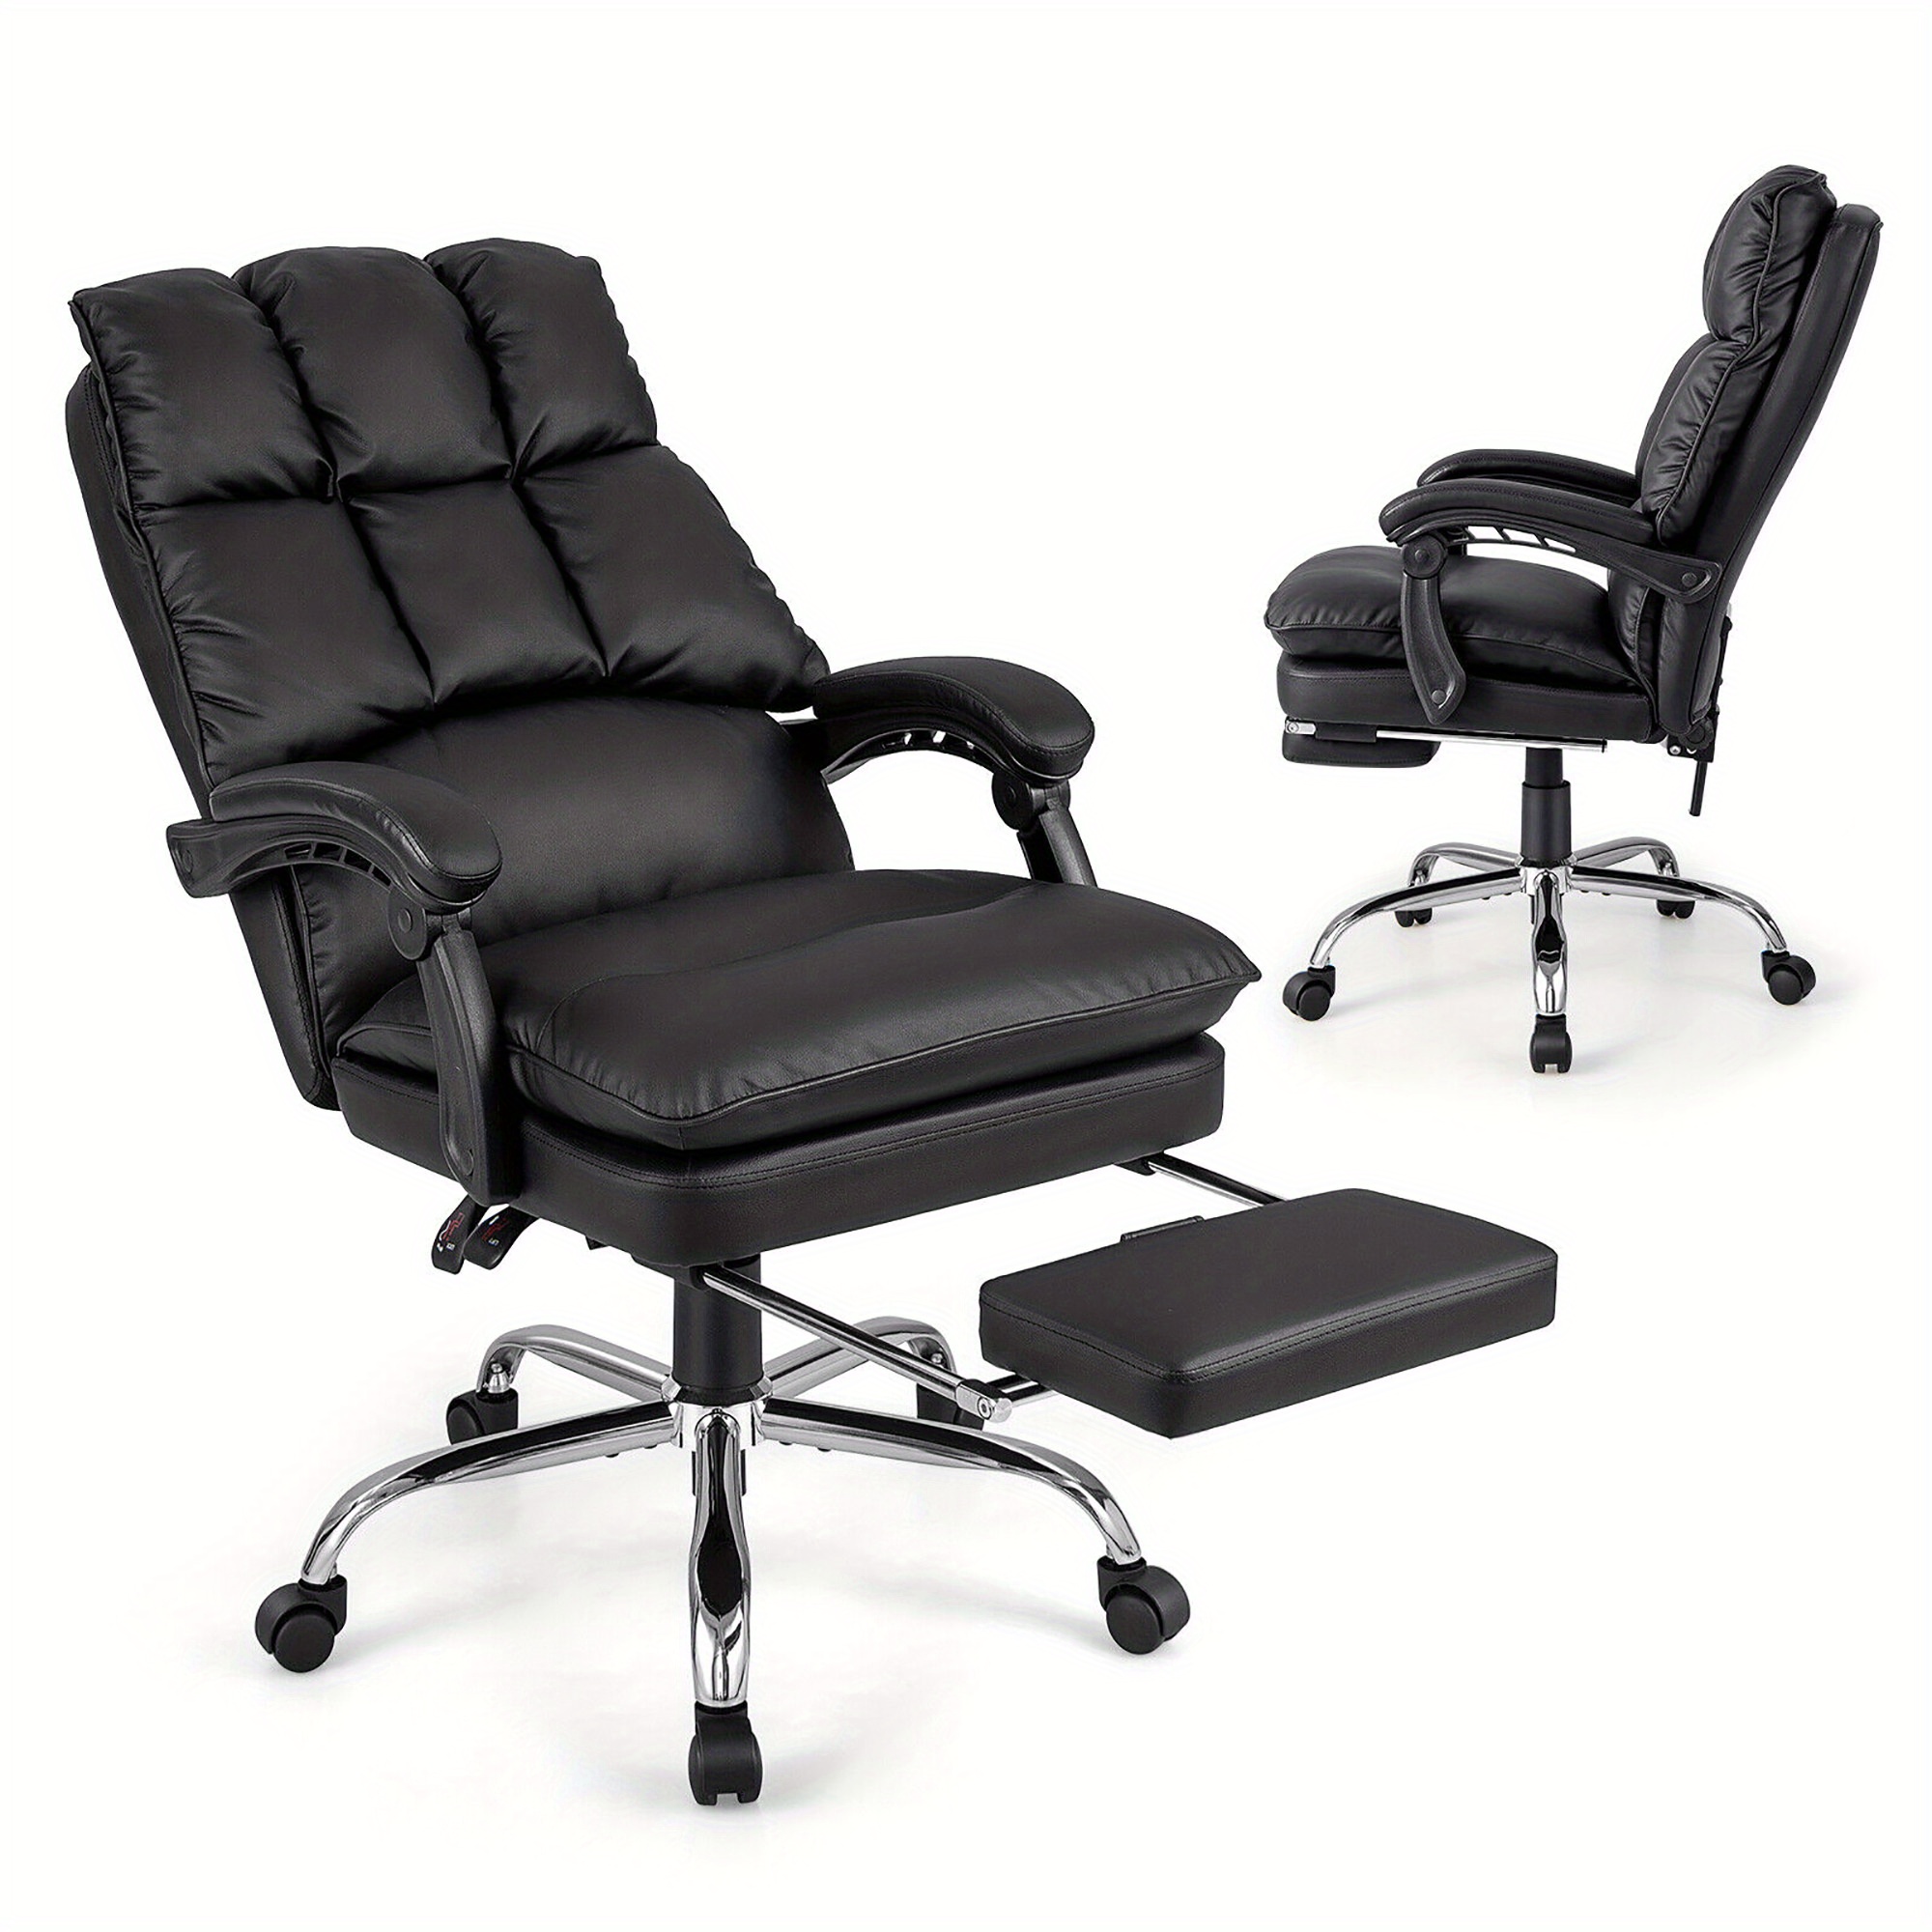 

Gymax High Back Reclining Office Chair Ergonomic Computer Desk Chair W/ Footrest & Pad